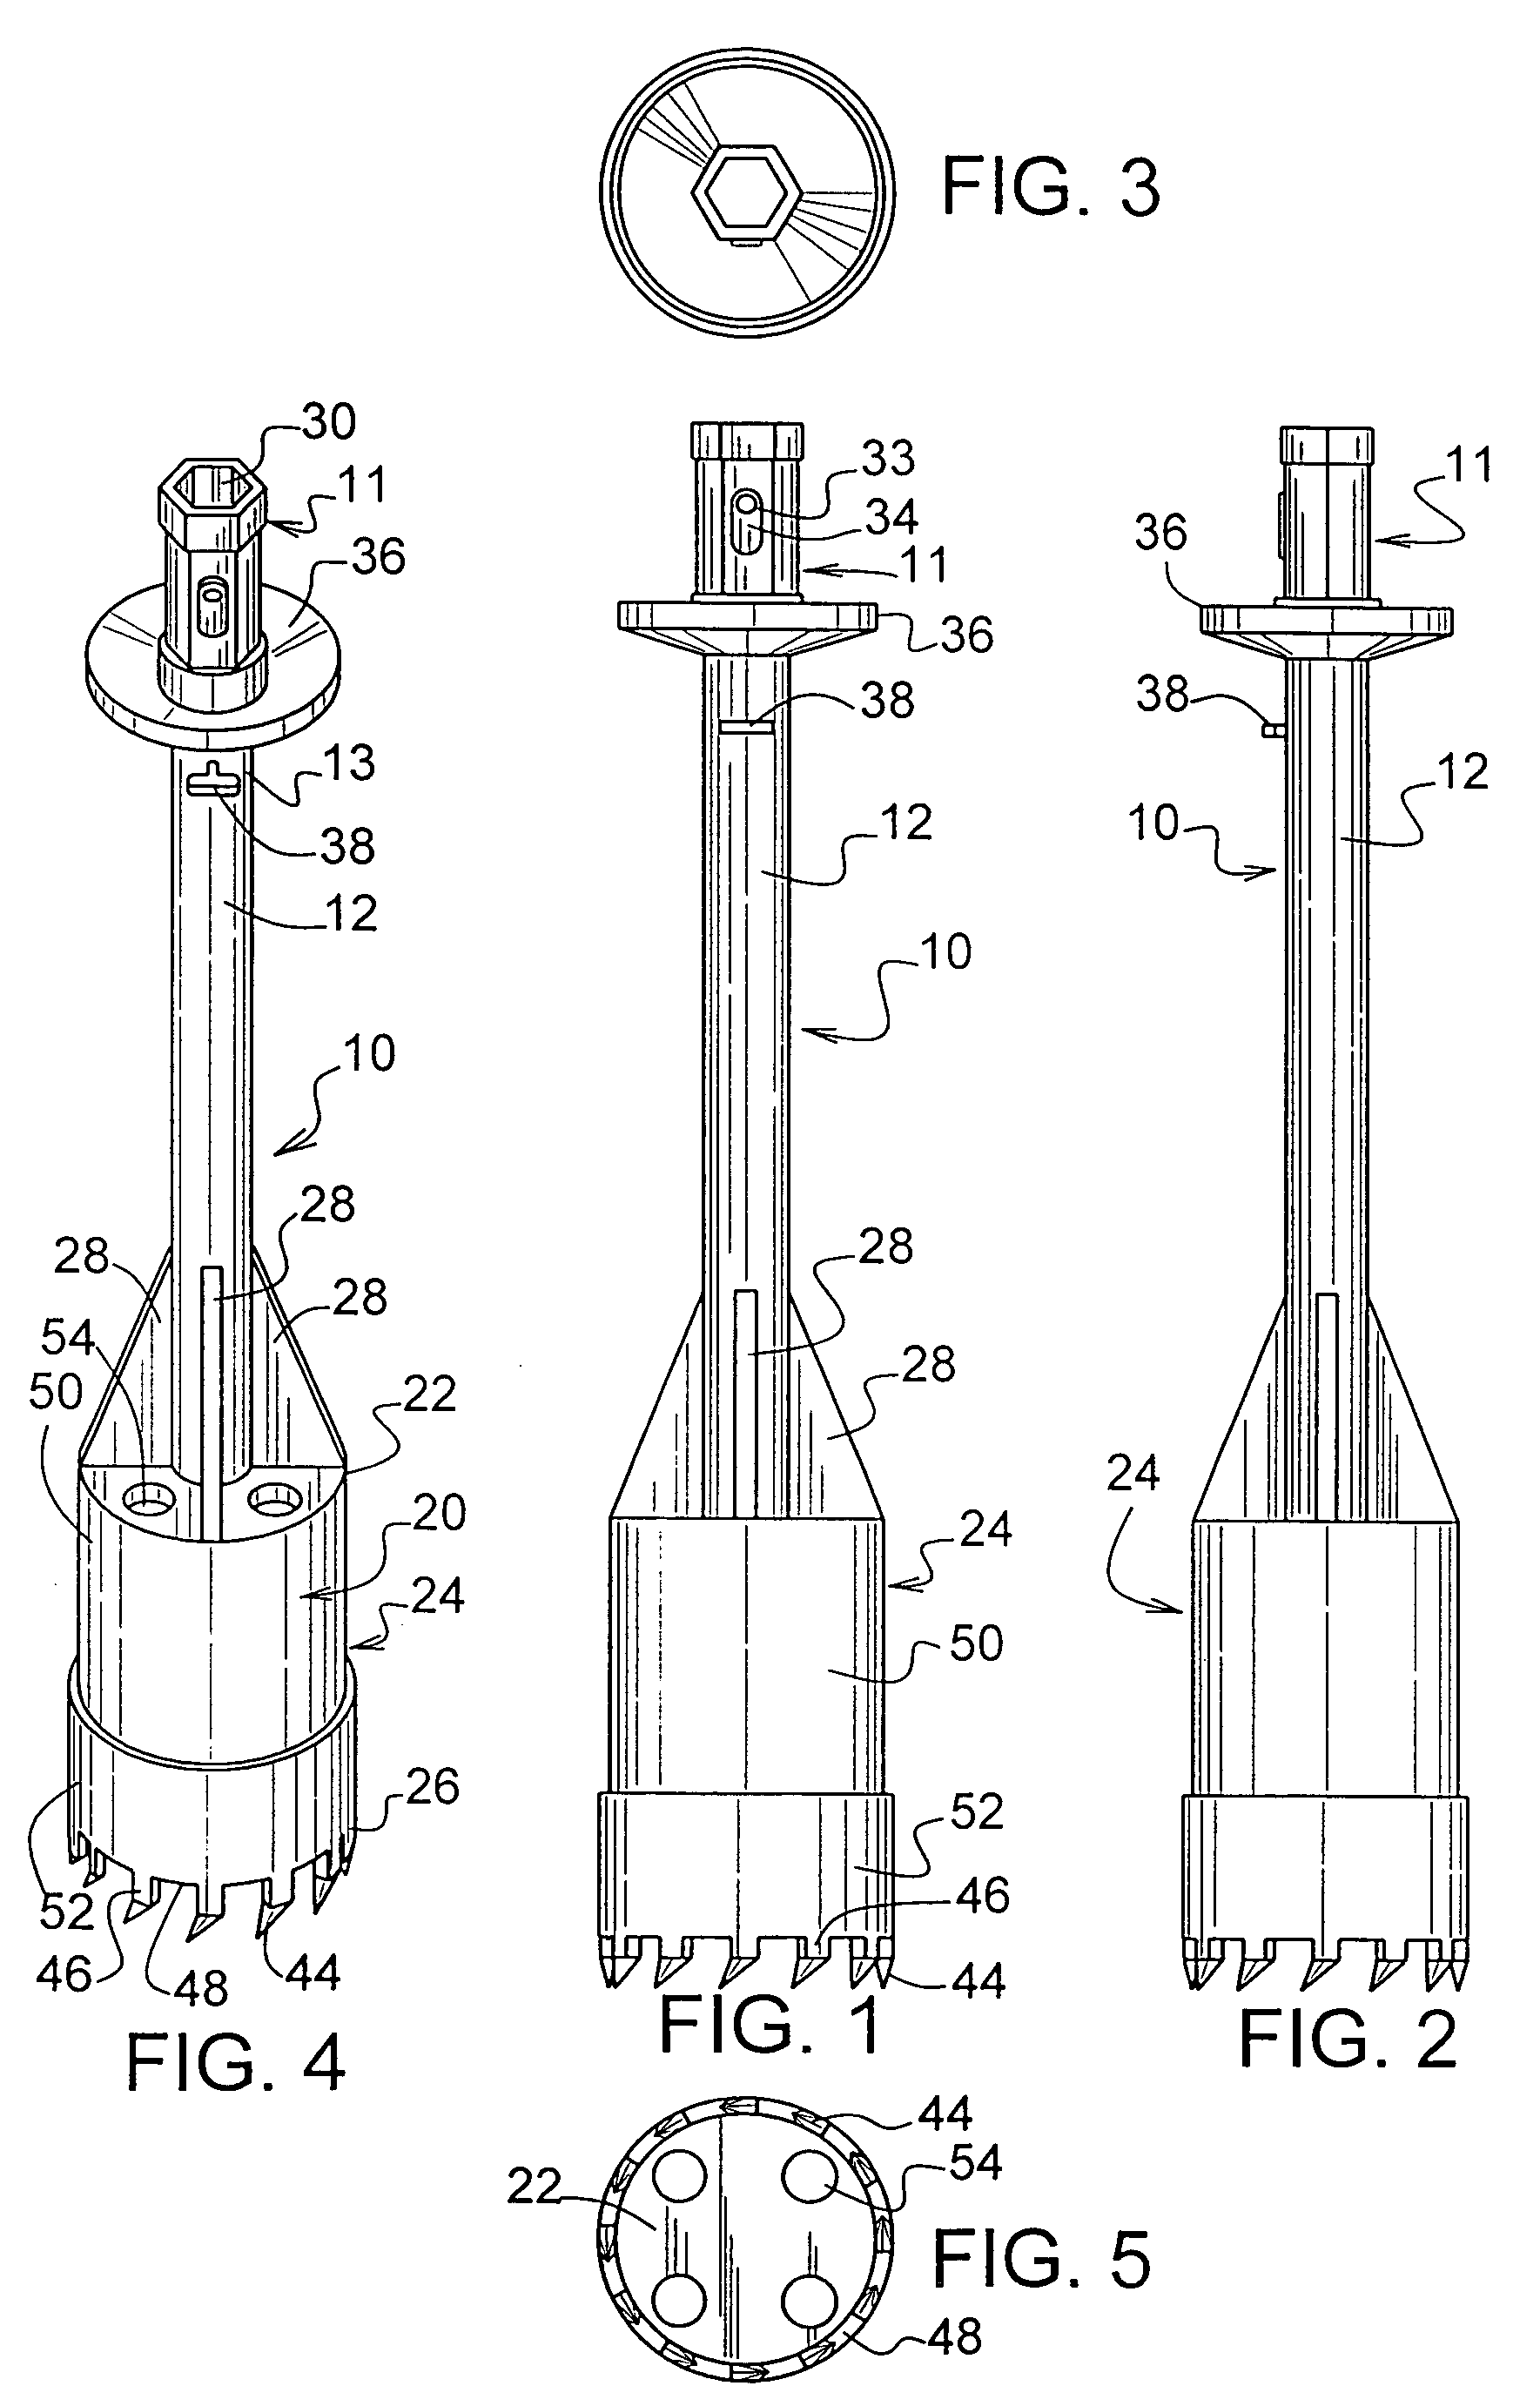 Flightless rock auger for use with pressure drills with quick attachment and method of use